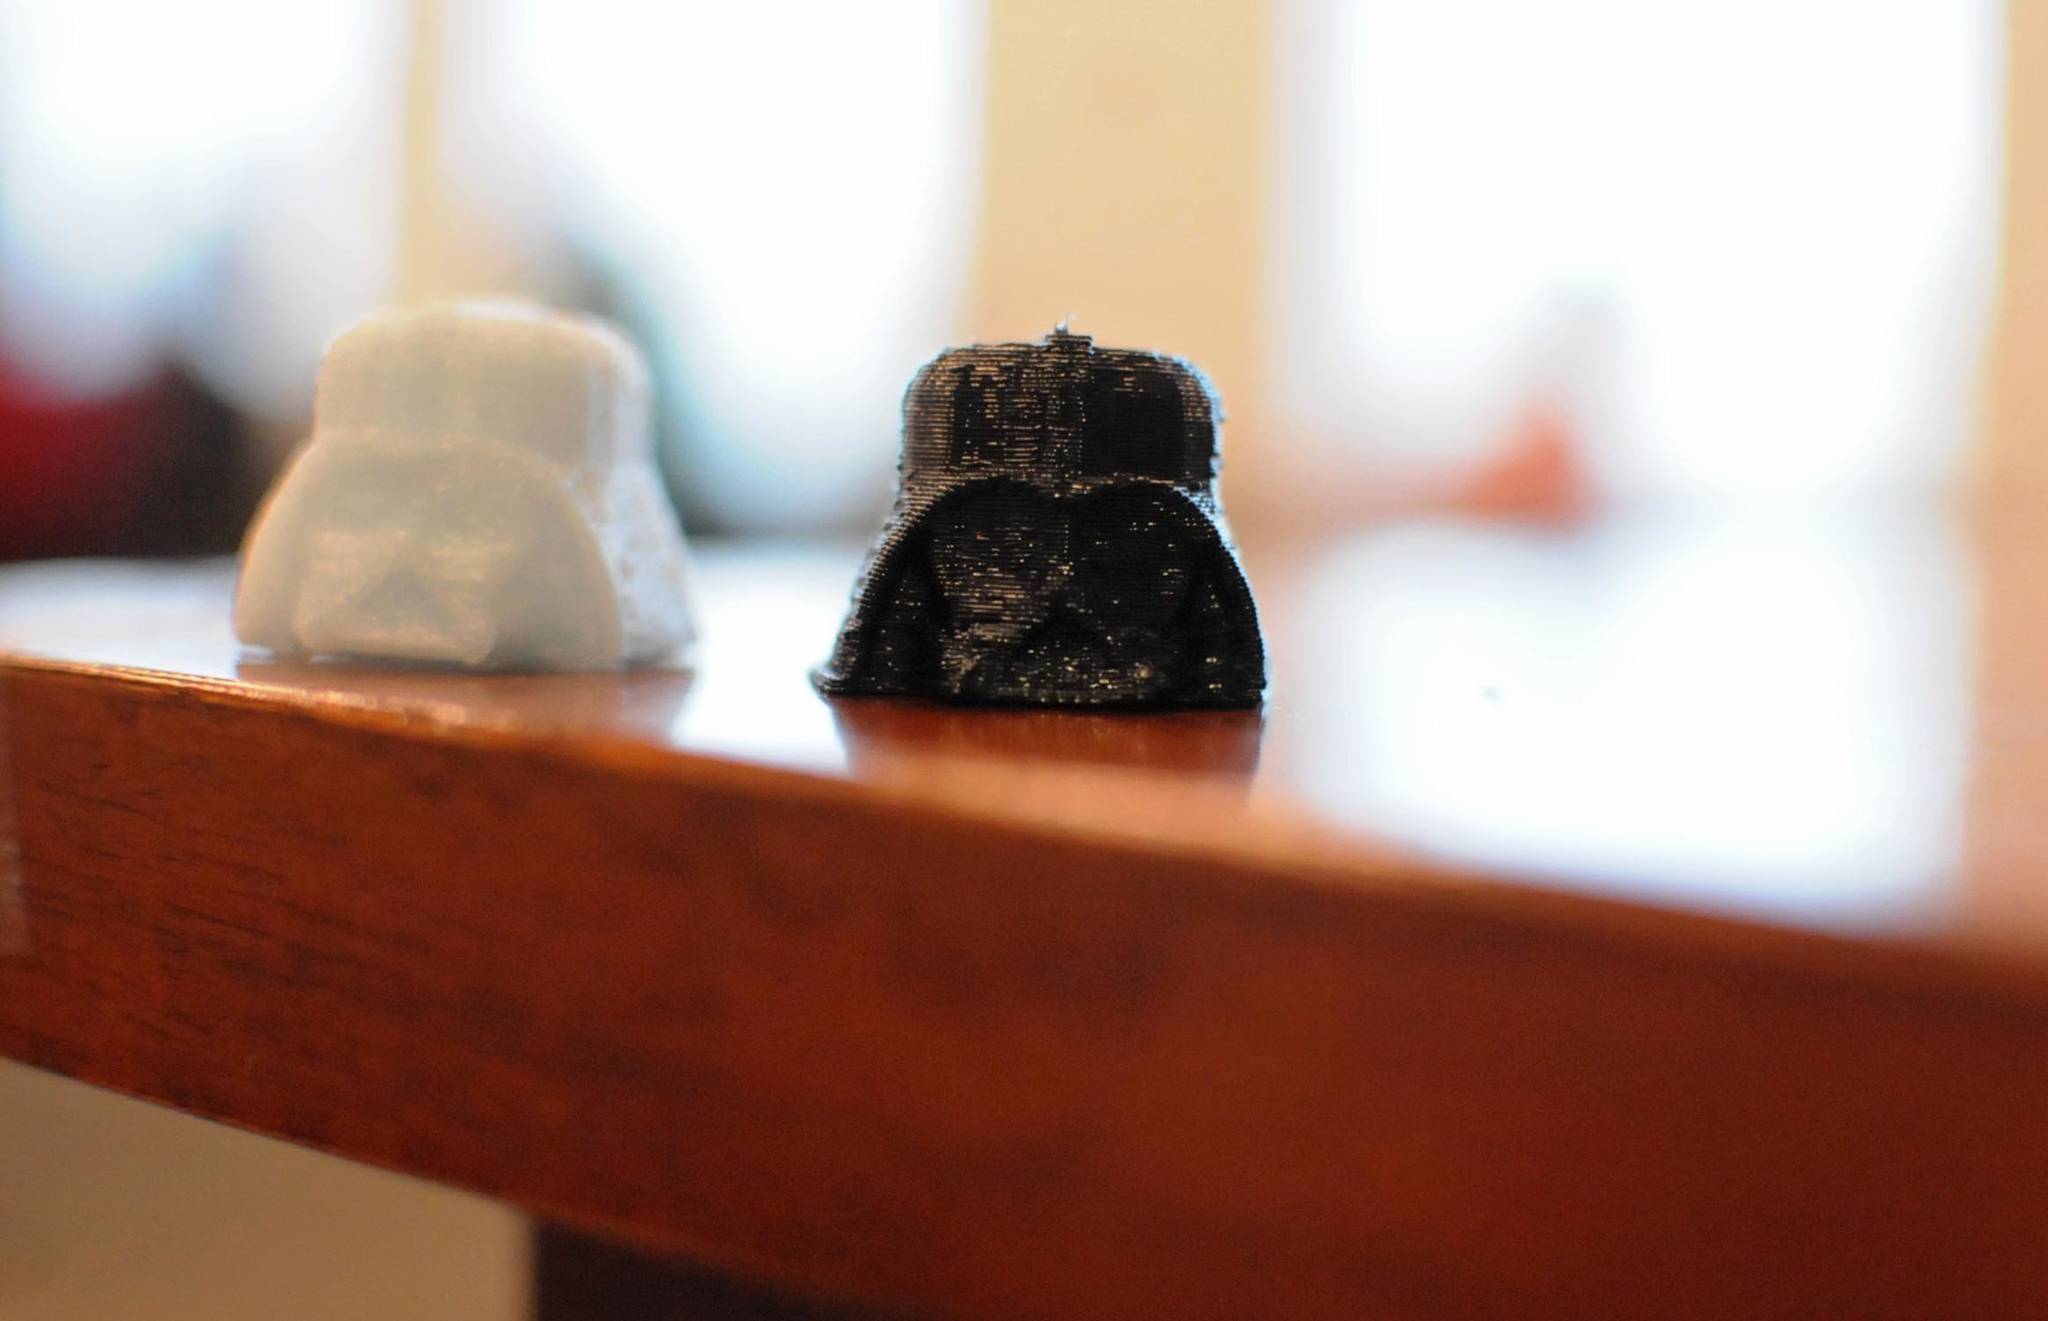 3D-printed plastic replicas of Darth Vader’s helmet from the “Star Wars” movie sit on a table at the Soldotna Public Library on Thursday, Oct. 19, 2017 in Soldotna, Alaska. The library acquired a 3D printer, which prints three-dimensional objects in plastic based on submitted patterns, in July and has opened it to public use. It’s currently free, supported by the Soldotna Library Friends, with a suggested donation of $3 per print. (Photo by Elizabeth Earl/Peninsula Clarion)